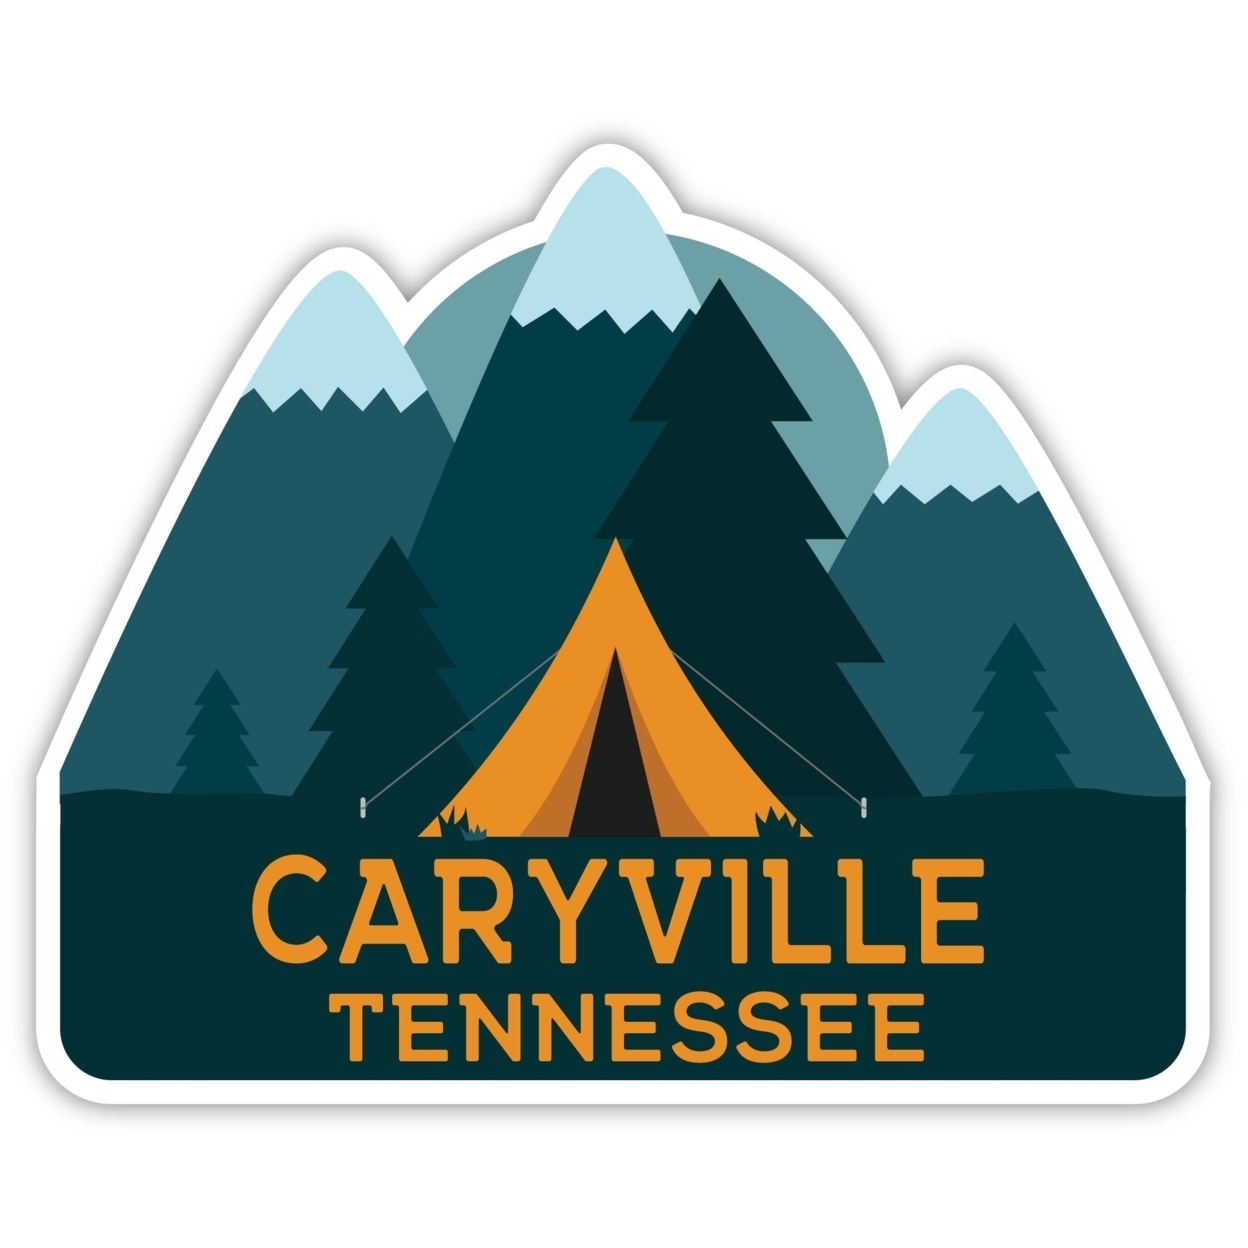 Caryville Tennessee Souvenir Decorative Stickers (Choose Theme And Size) - Single Unit, 8-Inch, Tent